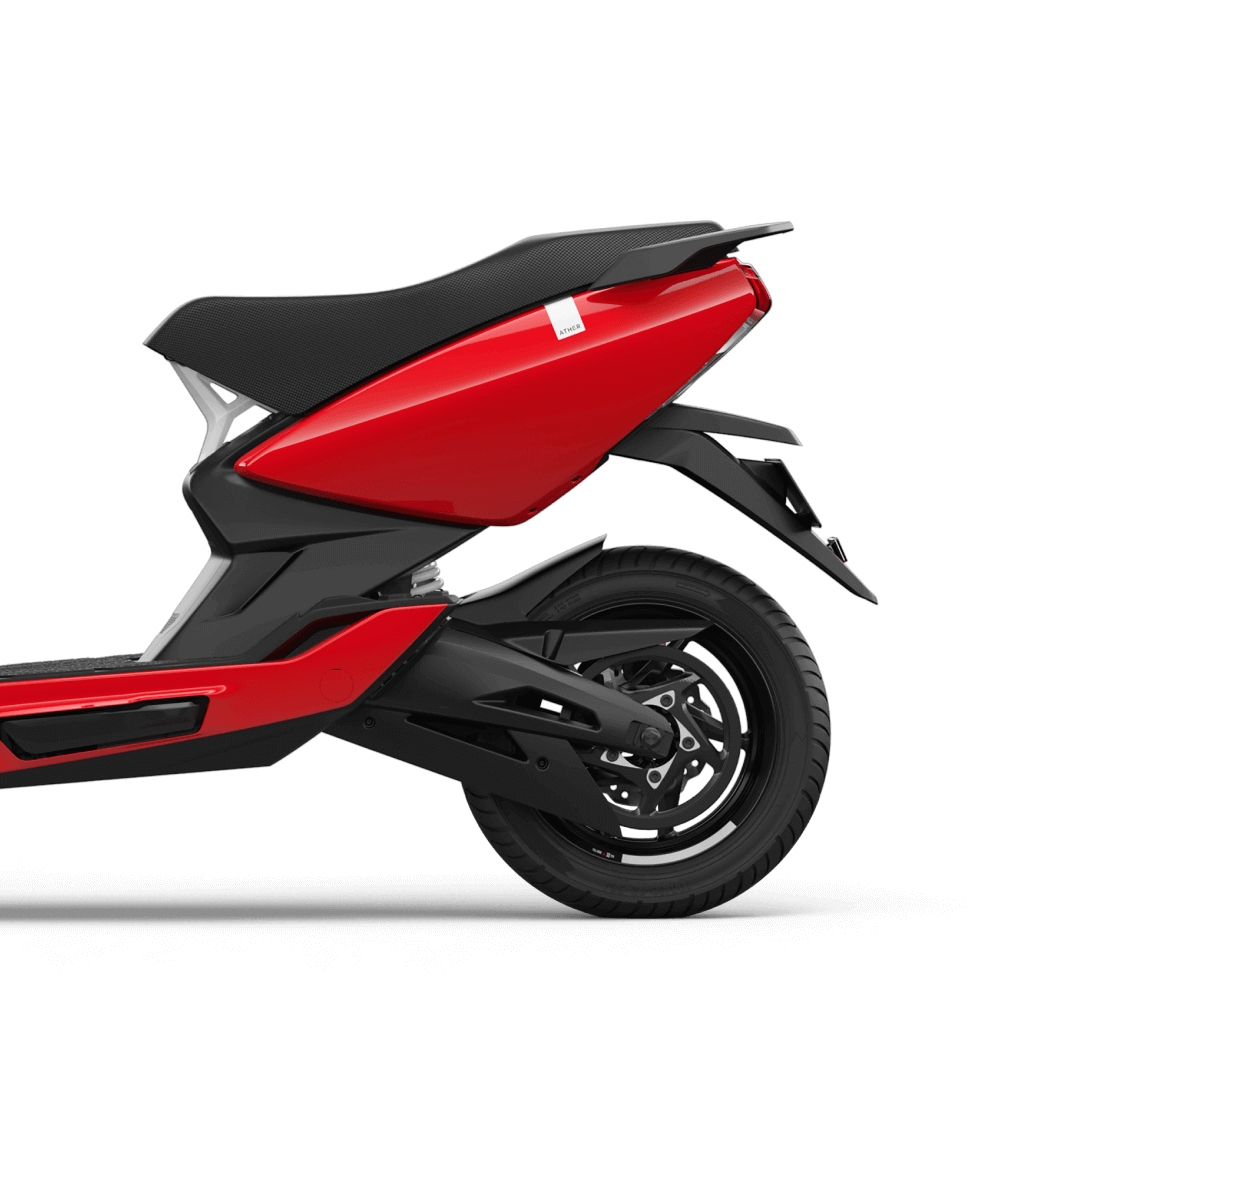 Ather Electric Scooter True Red Colour